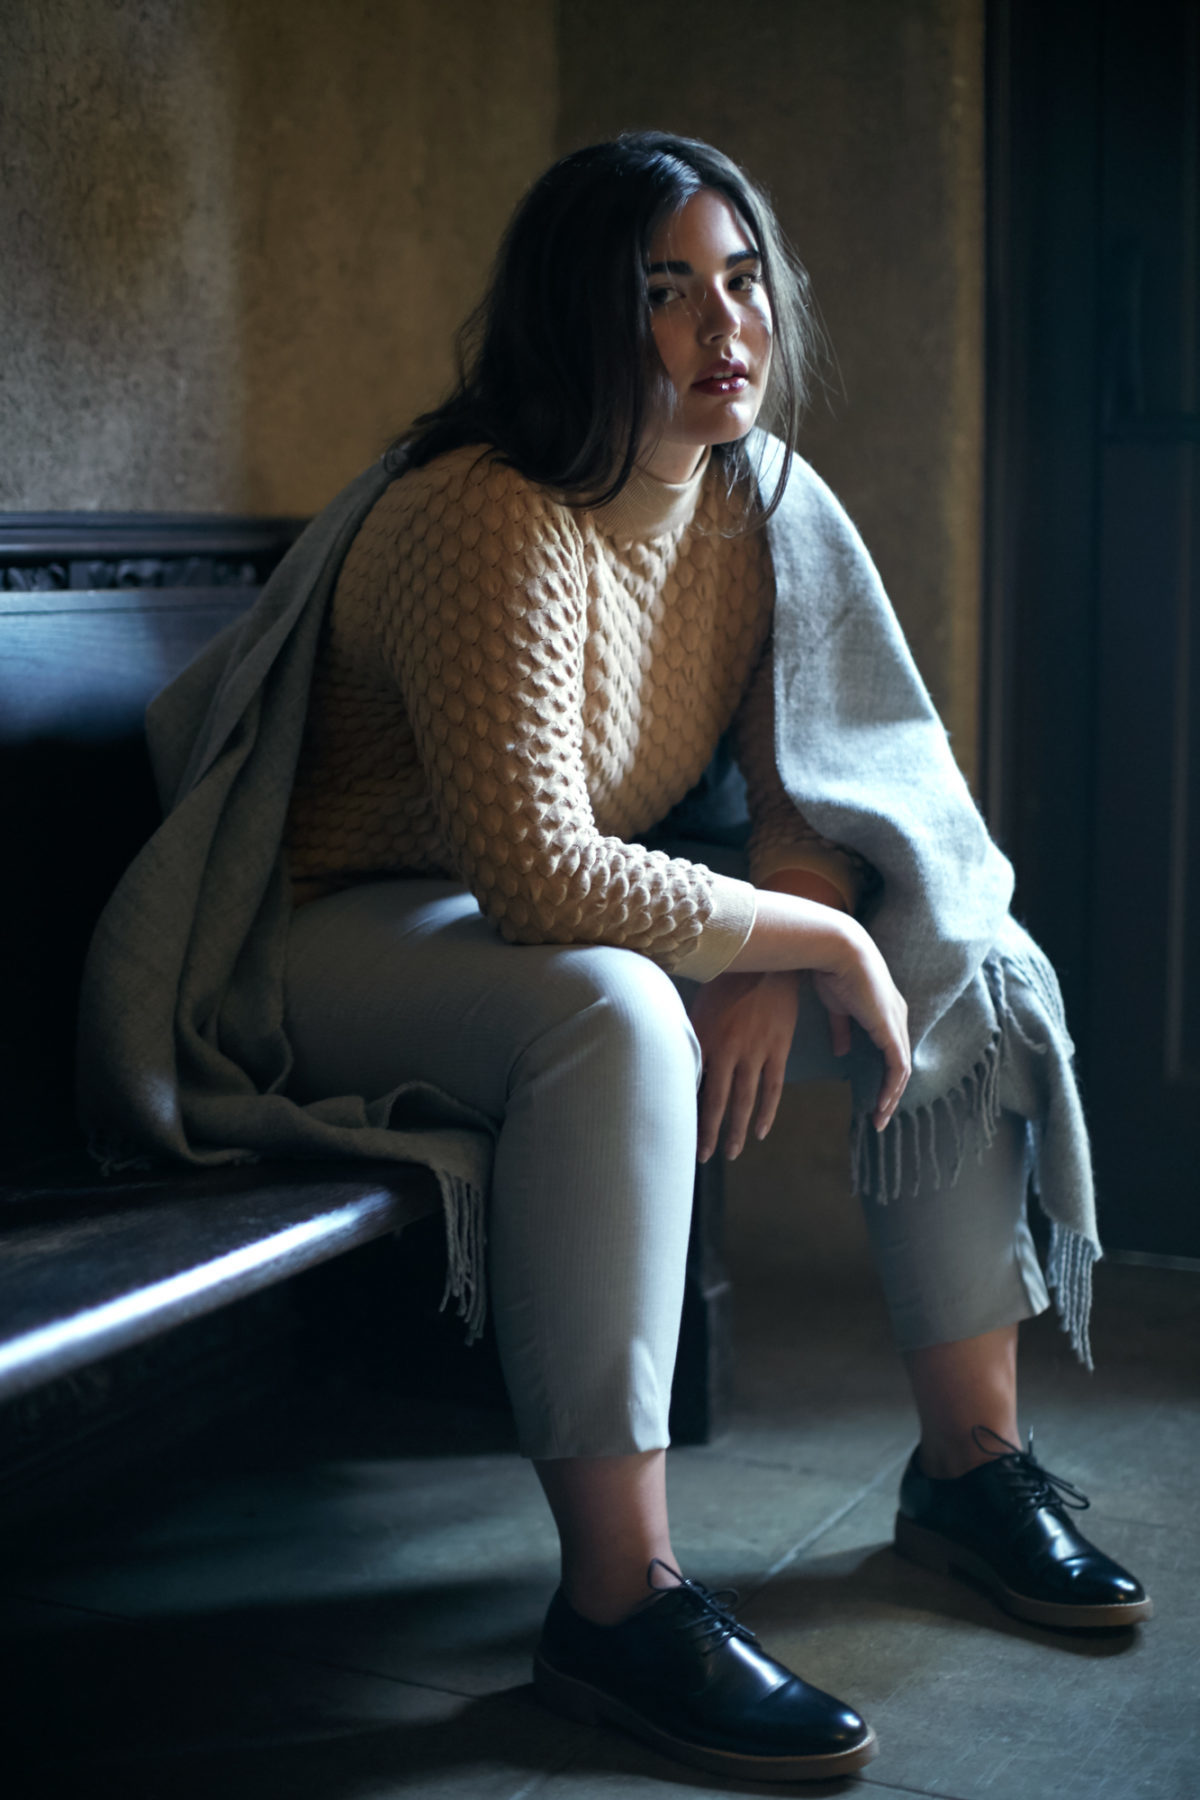 A woman sitting on a bench inside a dark room with a shawl wrapped around one shoulder, a sweater and denim pants